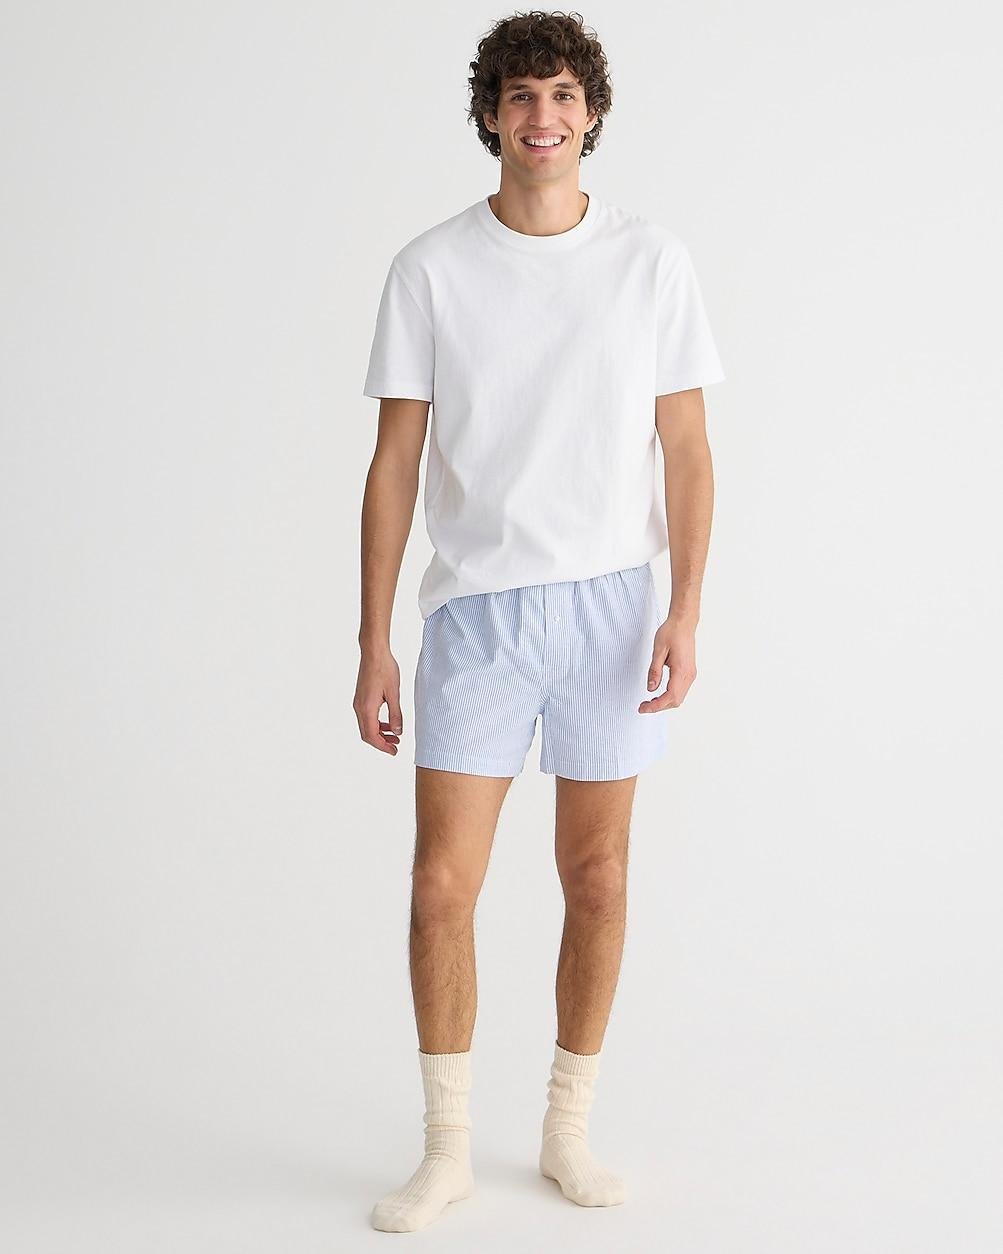 Boxer shorts in Broken-in organic cotton oxford by J.CREW